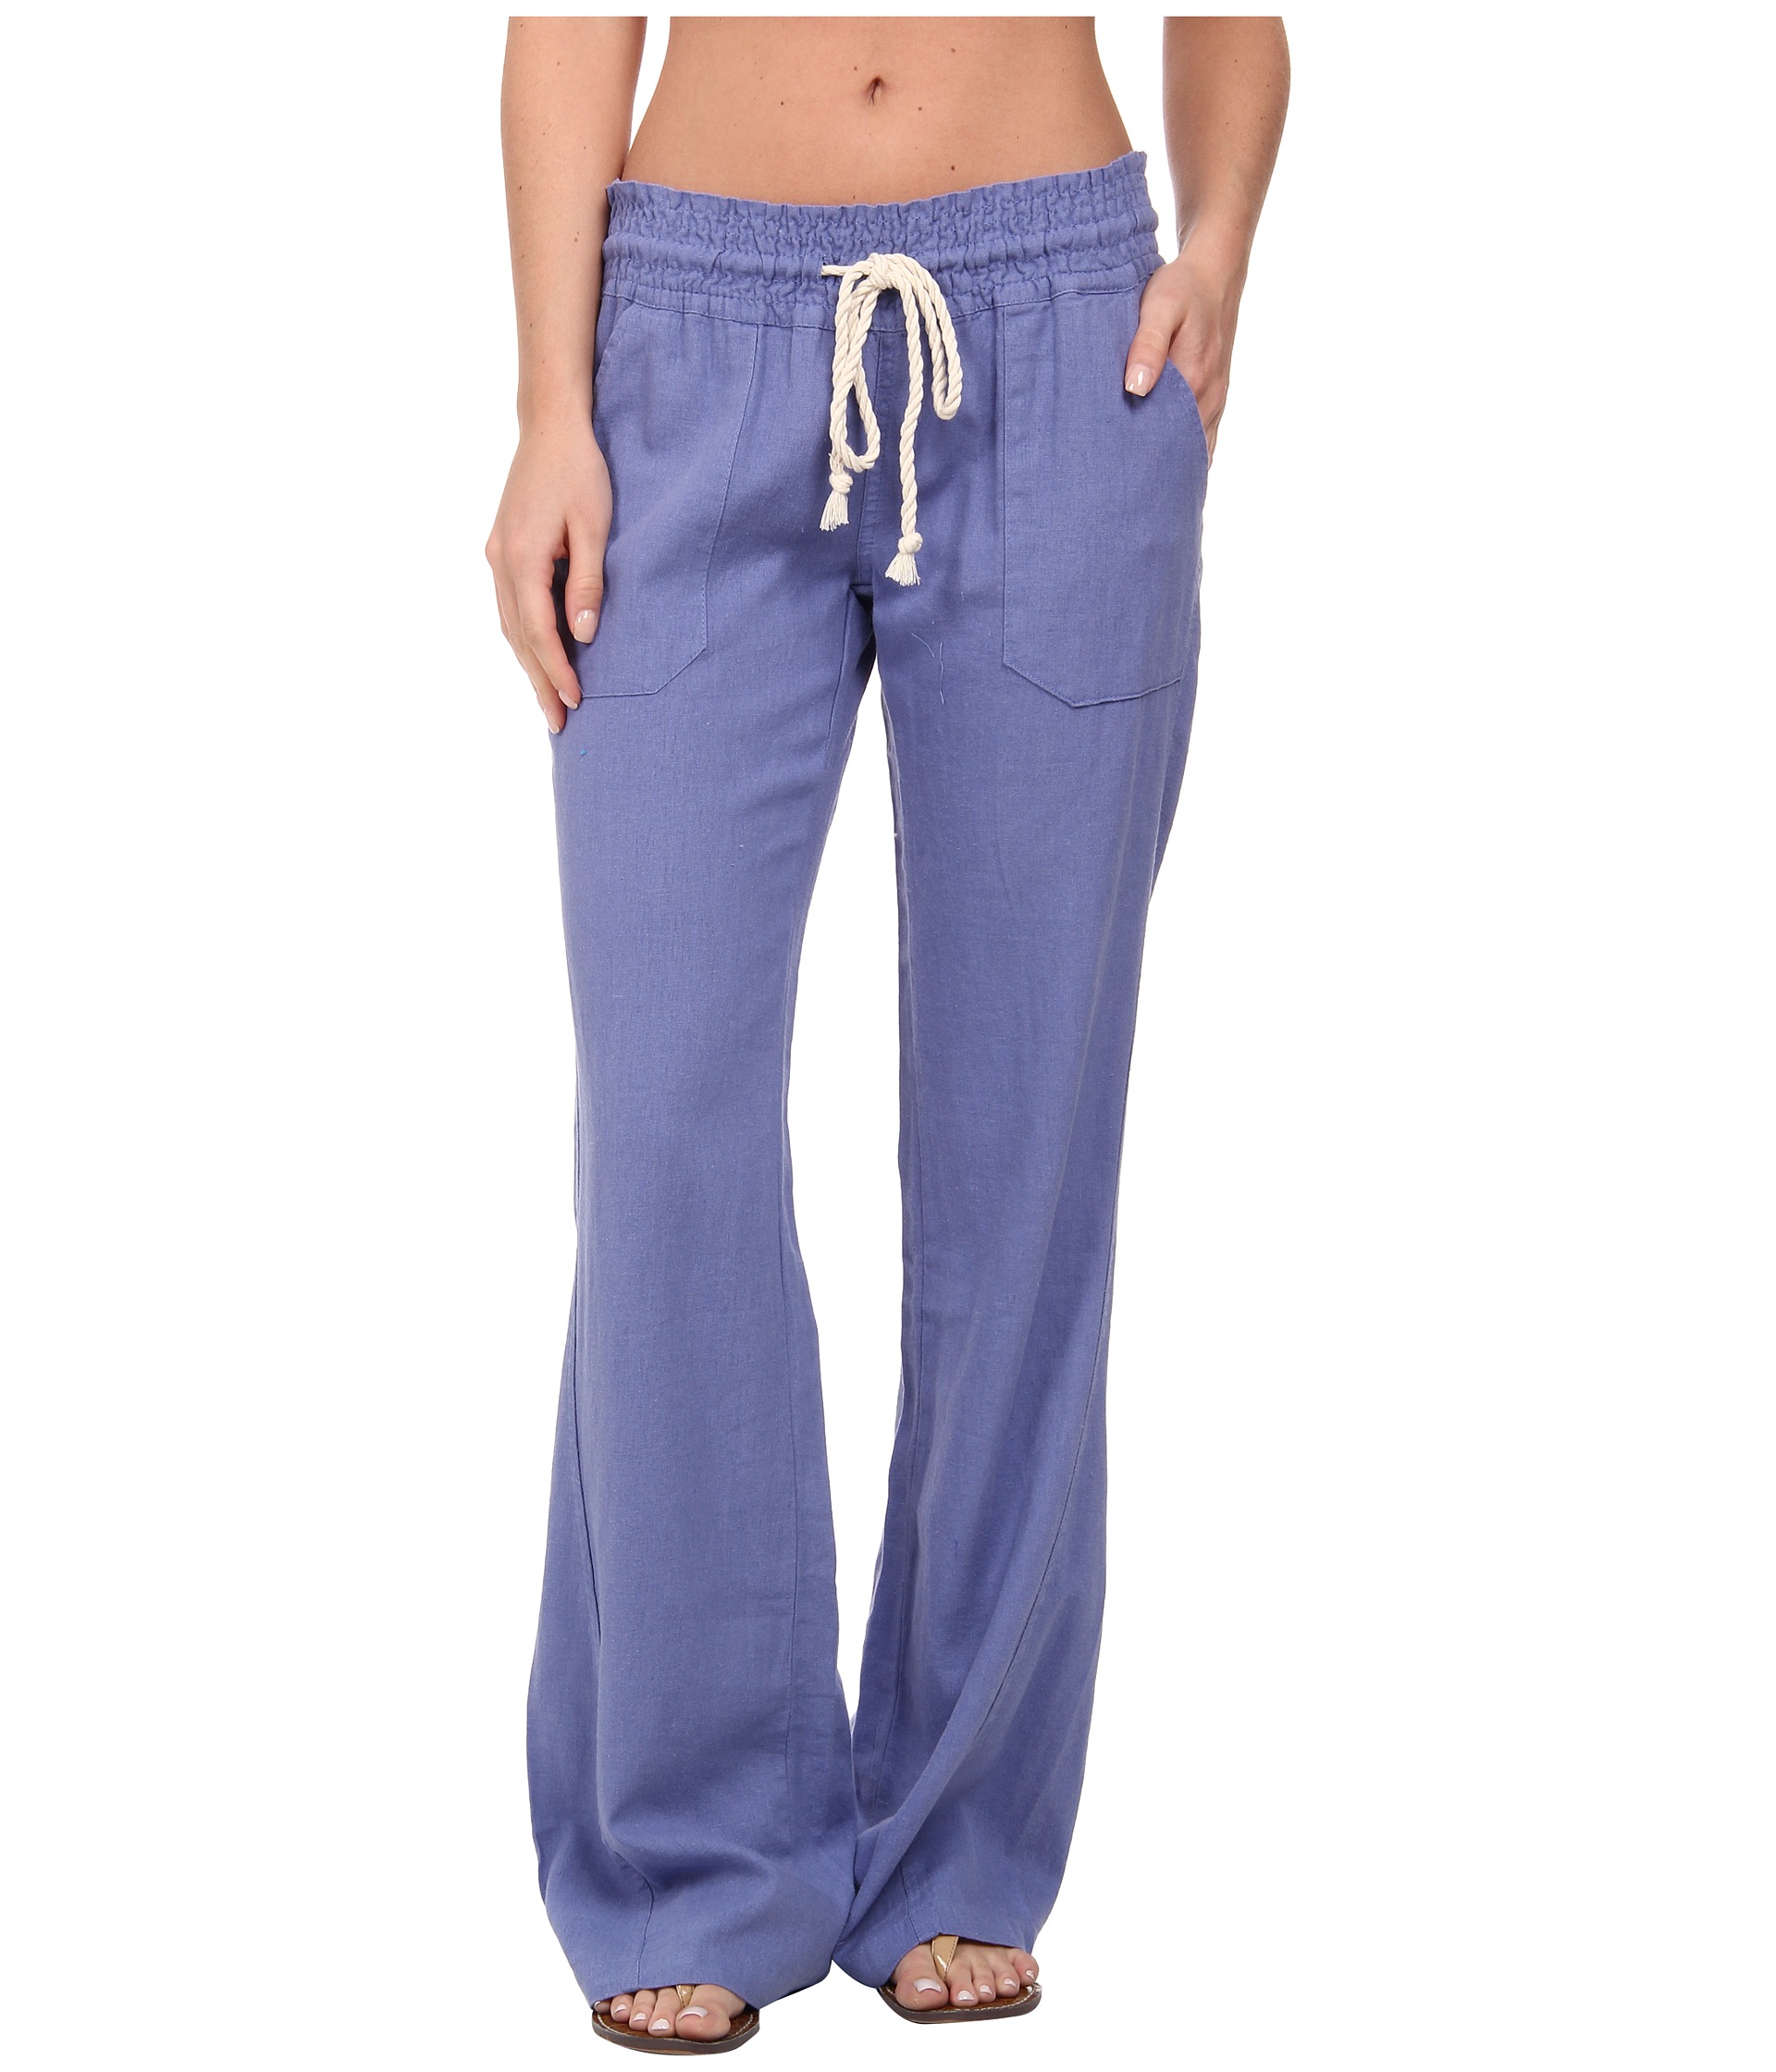 Roxy Oceanside Pant Cover Up Chambray | Shipped Free at Zappos